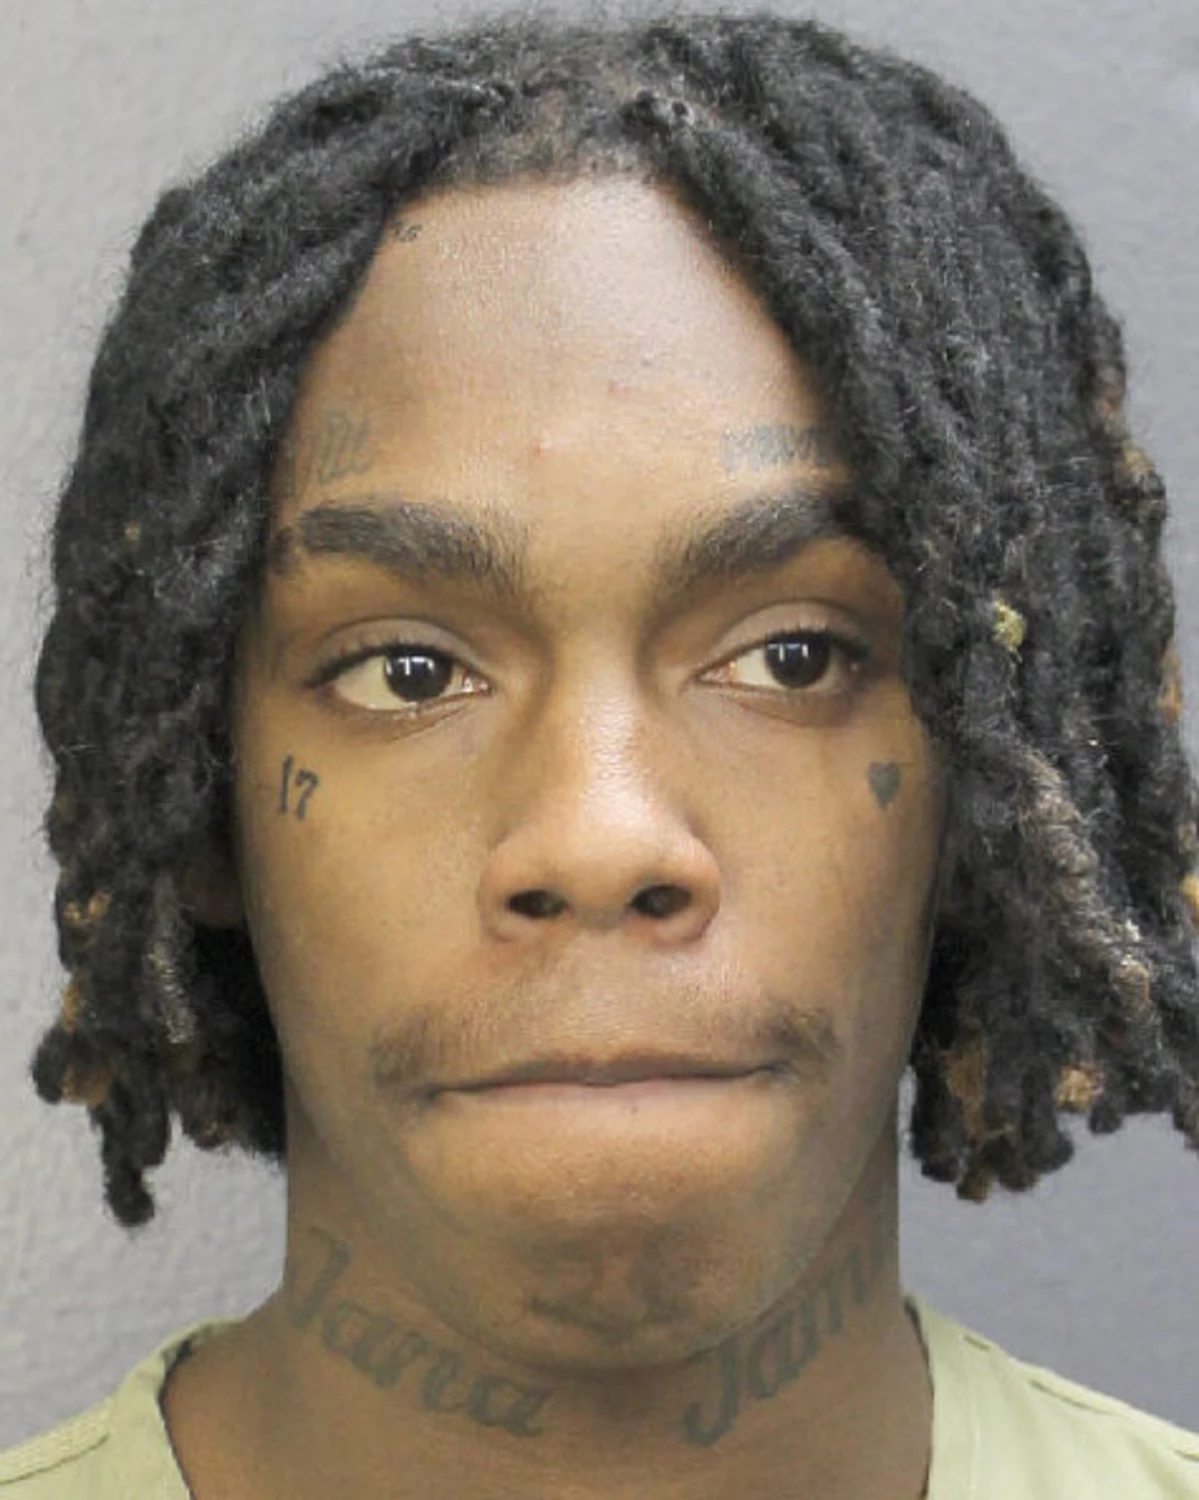 YNW Melly Is Reportedly Now A Suspect In The 2017 Fatal Shooting Of A Polic...